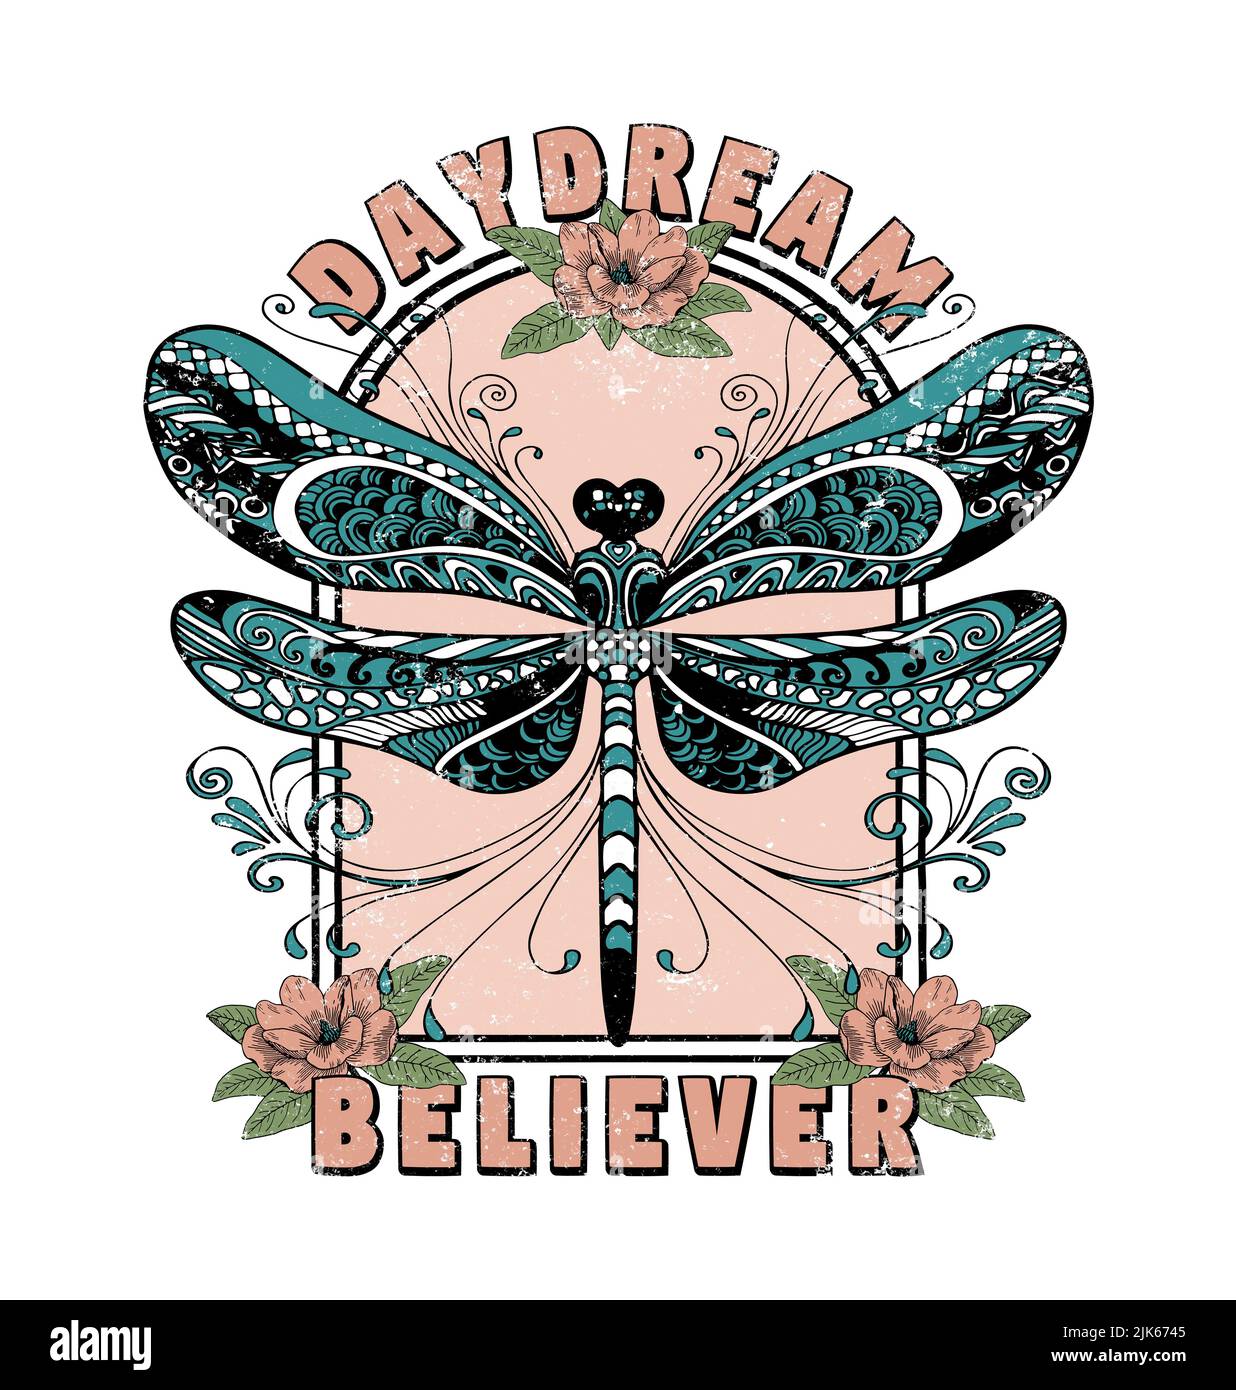 Daydream Believer - Vintage Dragonfly Graphic Stock Photo